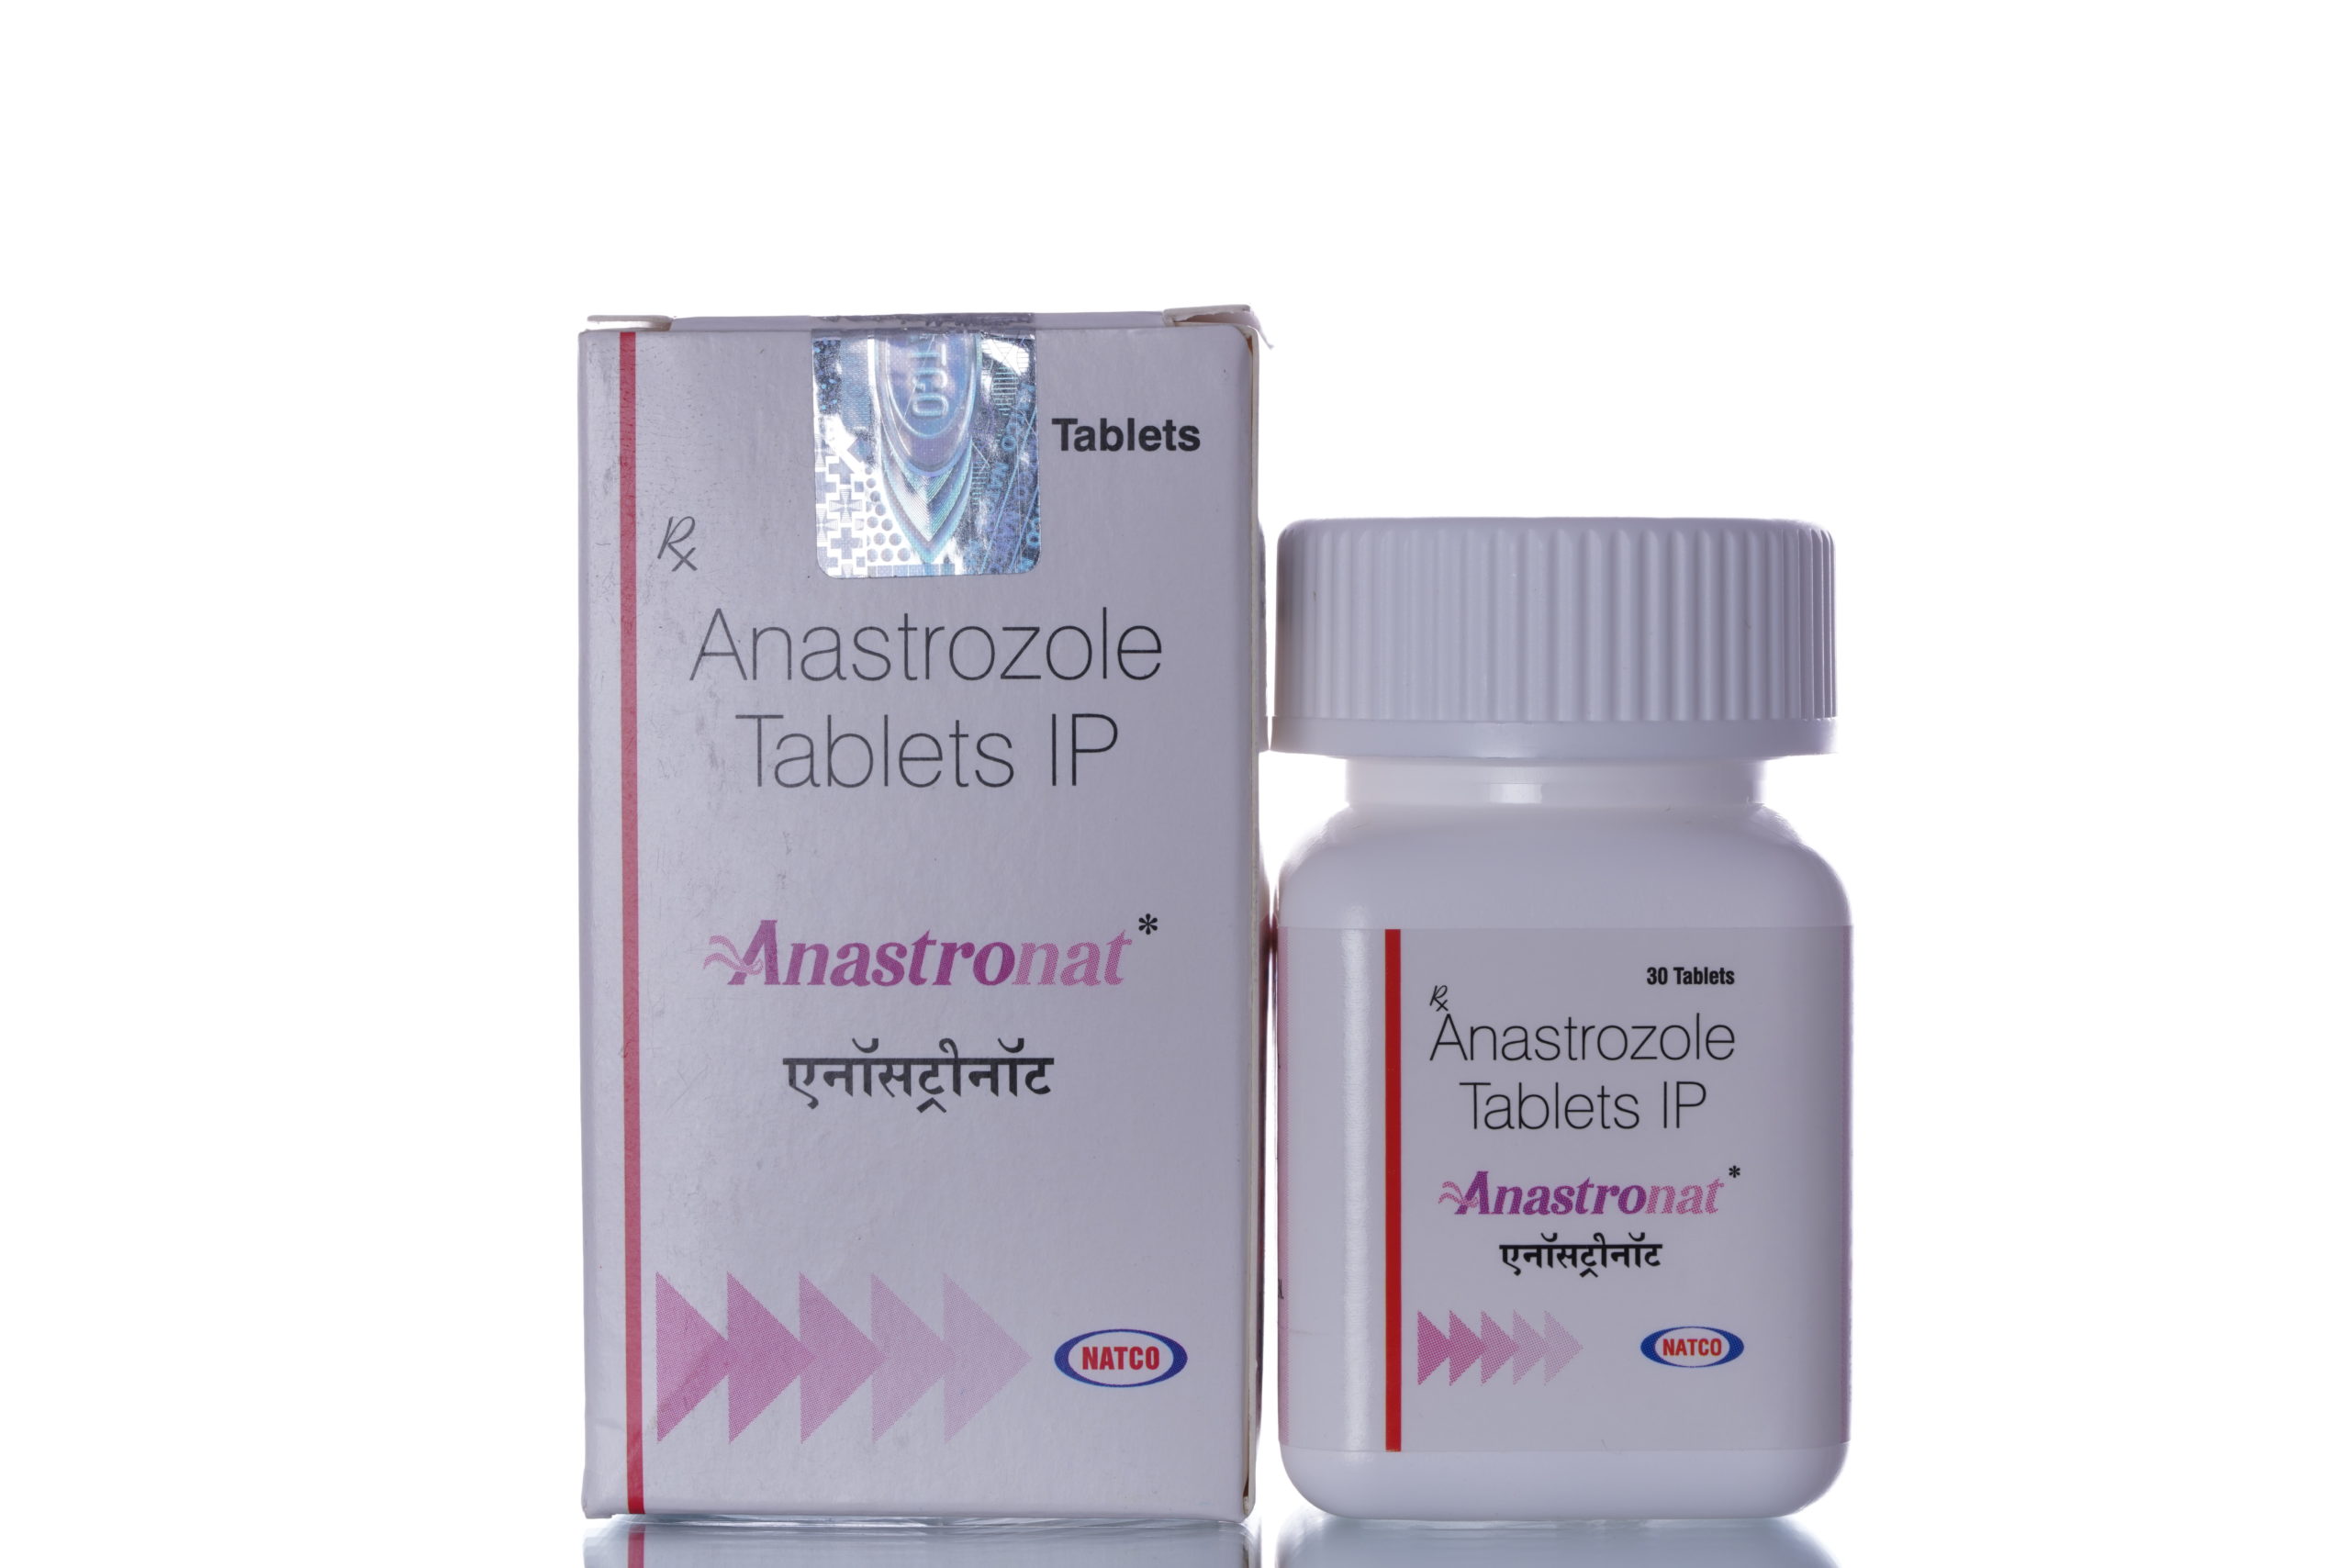 Top 5 Books About letrozole uk for sale